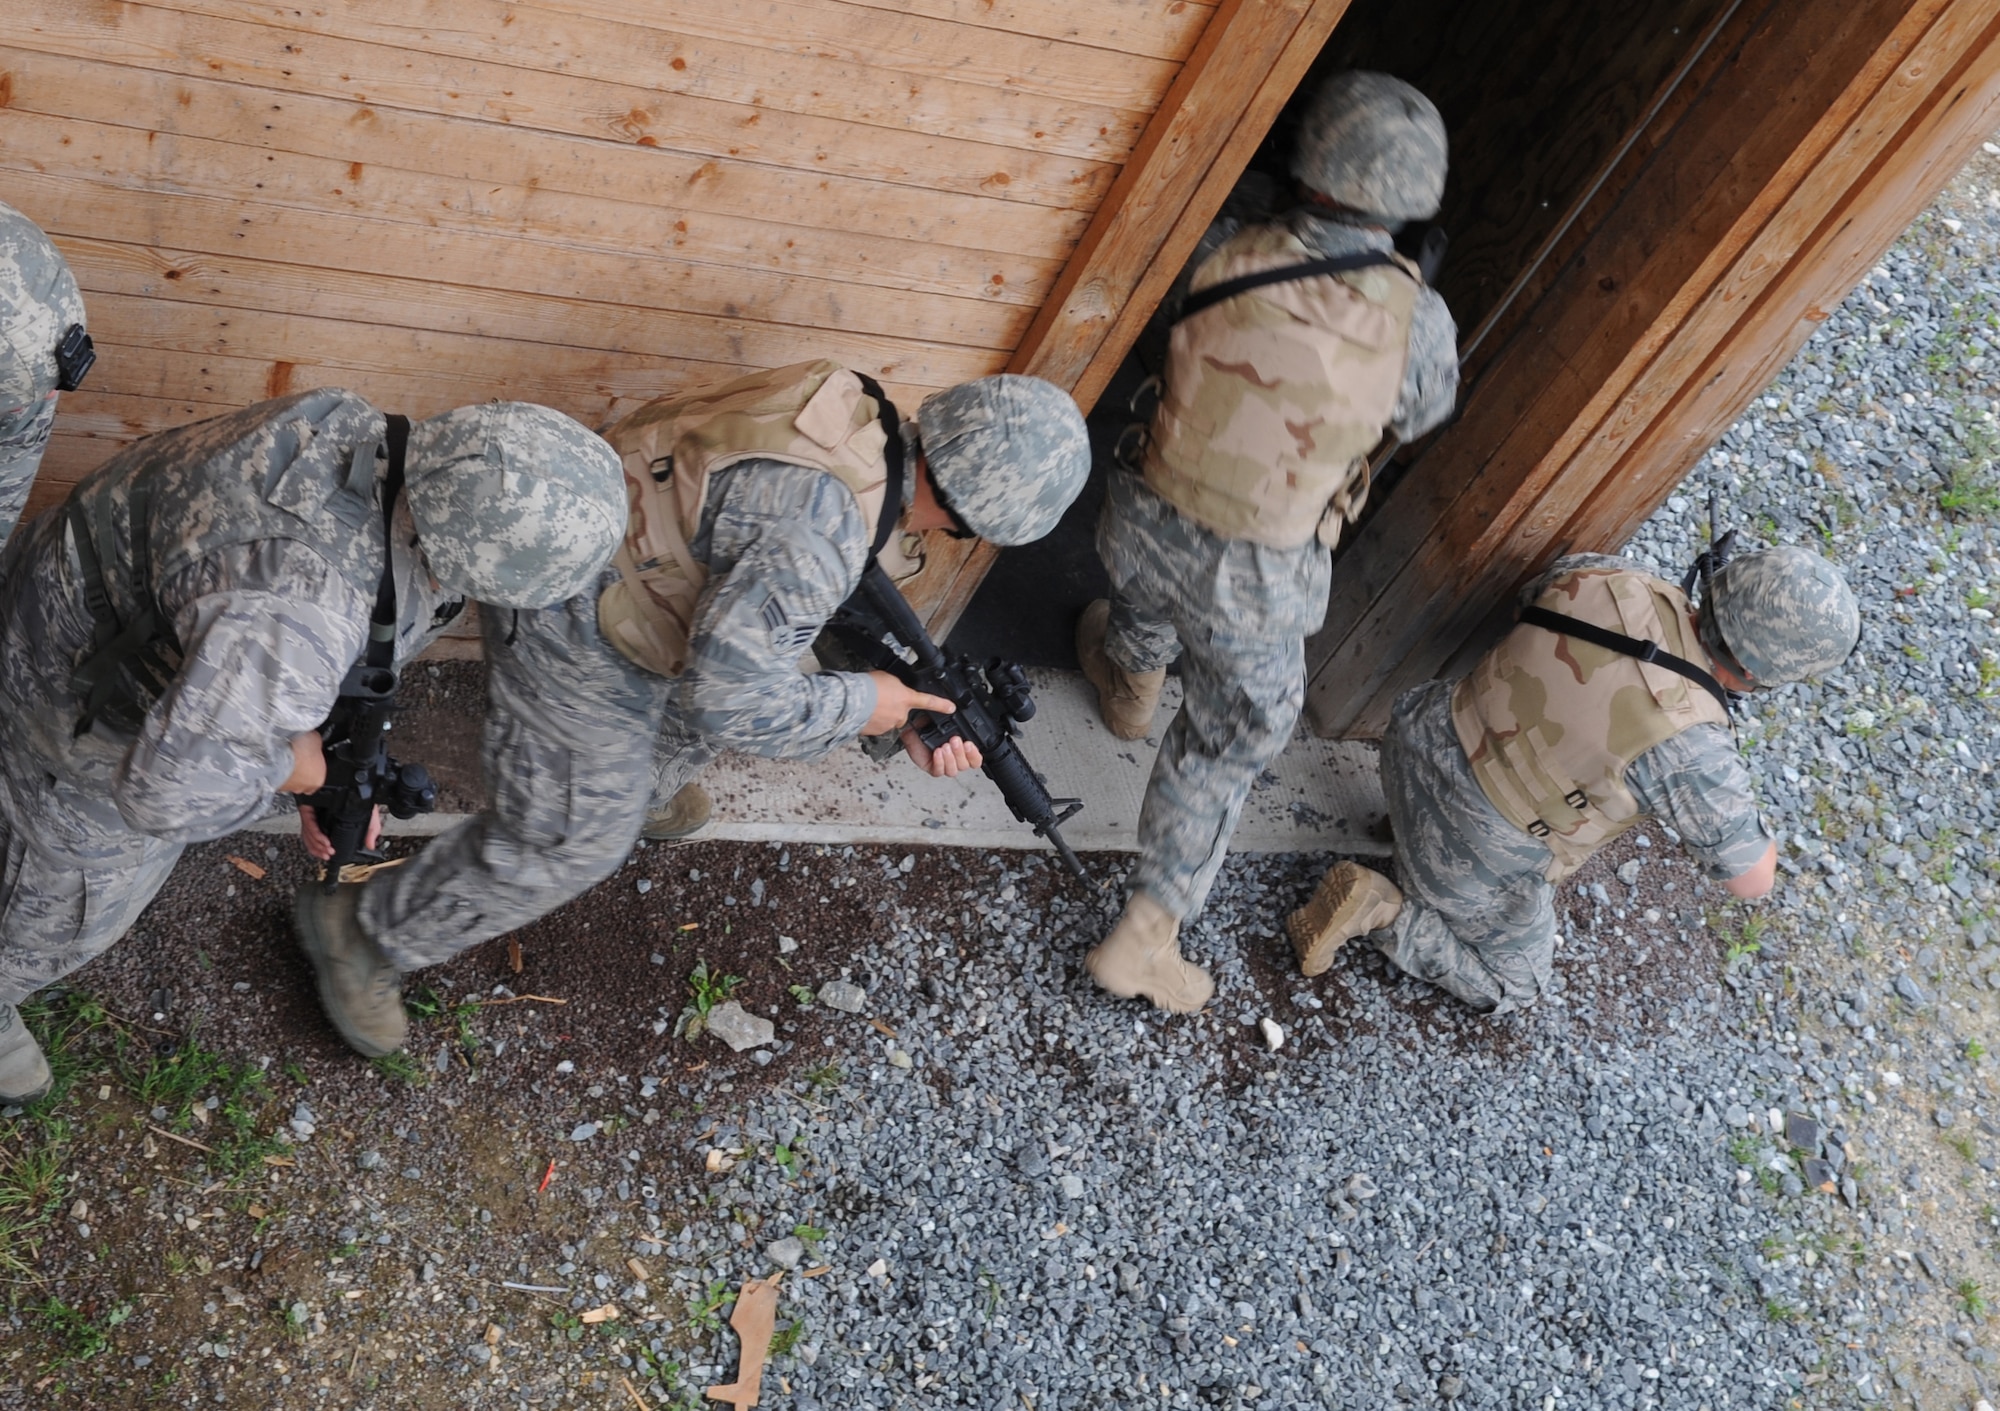 U.S. Air Force Airmen participating in urban close combat training clear a building during exercise ALLIED STRIKE 10, Grafenwoehr, Germany, July 26, 2010. AS 10 is Europe's premier close air support (CAS) exercise, held annually to conduct robust, realistic CAS training that helps build partnership capacity among allied North Atlantic Treaty Organization nations and joint services while refining the latest operational CAS tactics. For more ALLIED STRIKE information go to www.usafe.af.mil/alliedstrike.asp. (U.S. Air Force photo by Senior Airman Caleb Pierce)